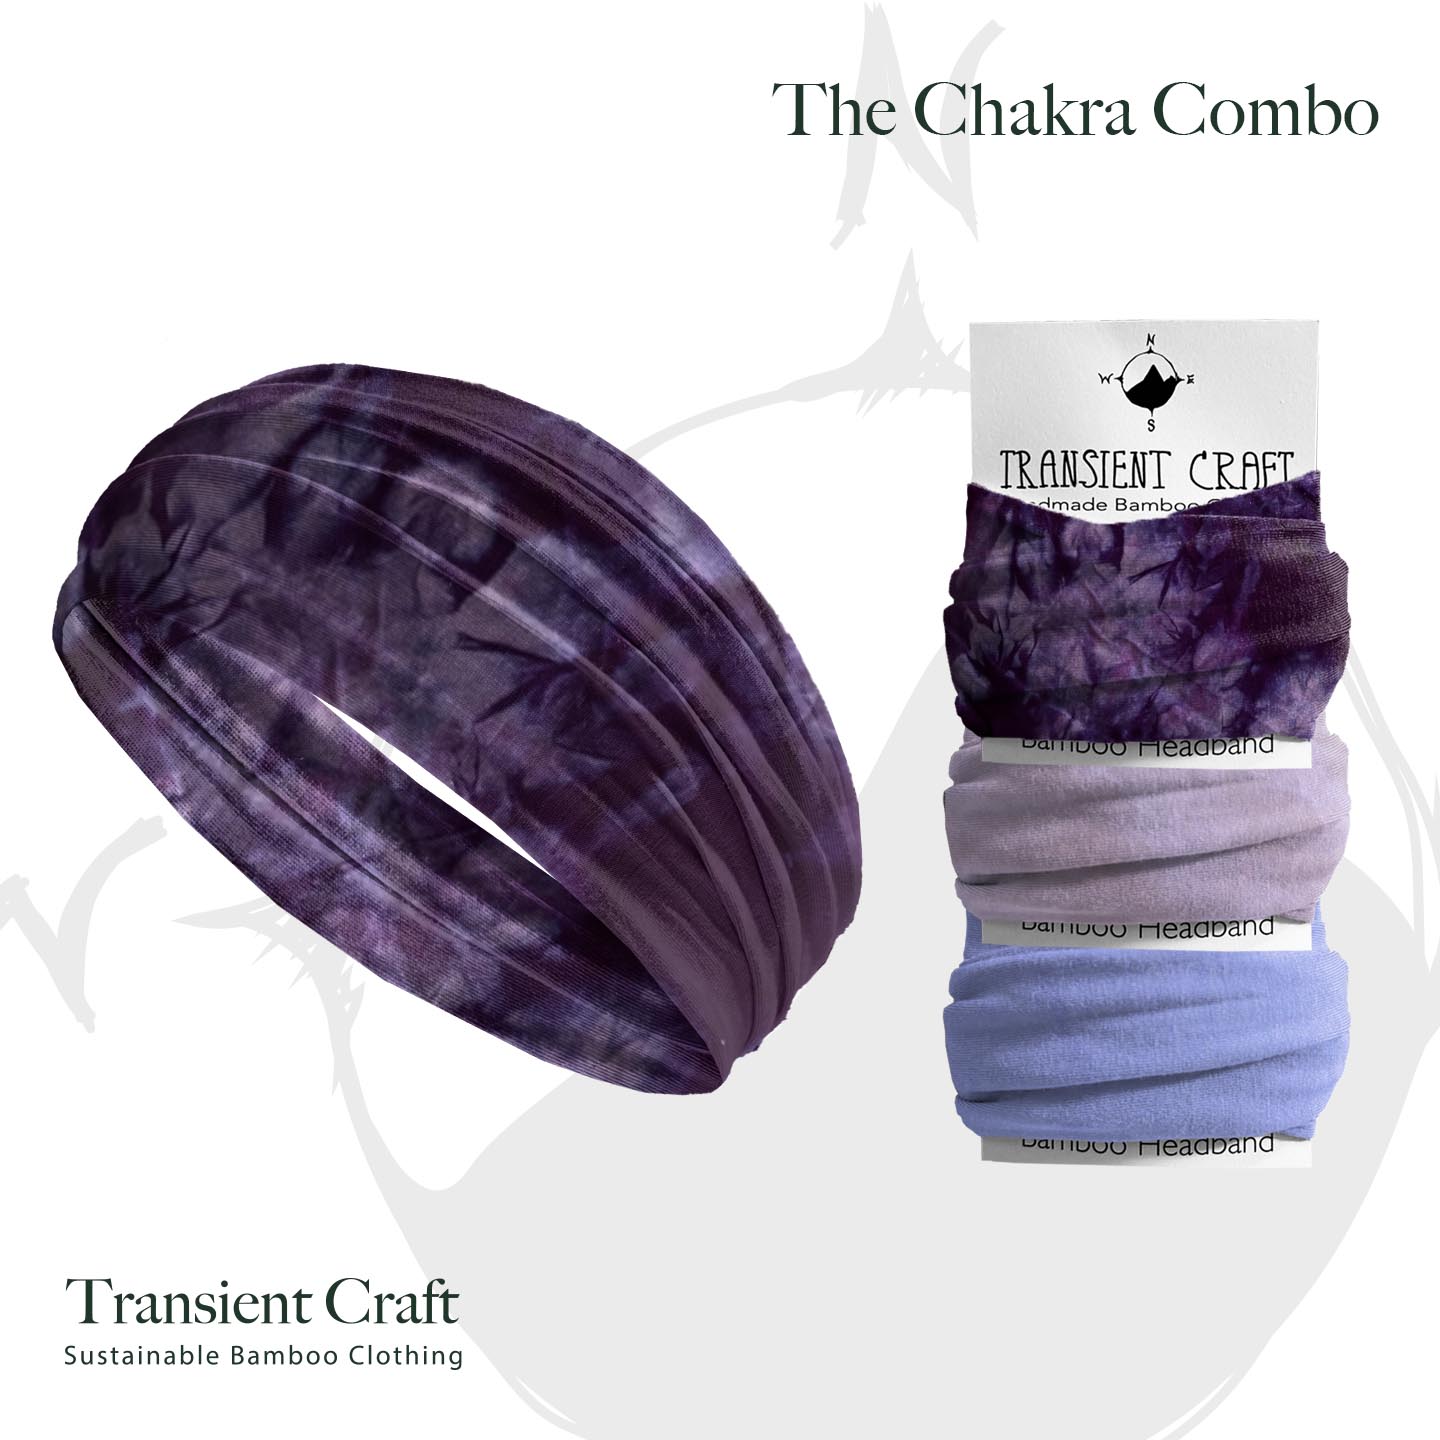 The Eco-Friendly Bamboo Headband 3 Pack - for Yoga - The Chakra Combo- An Athletic Must-Have